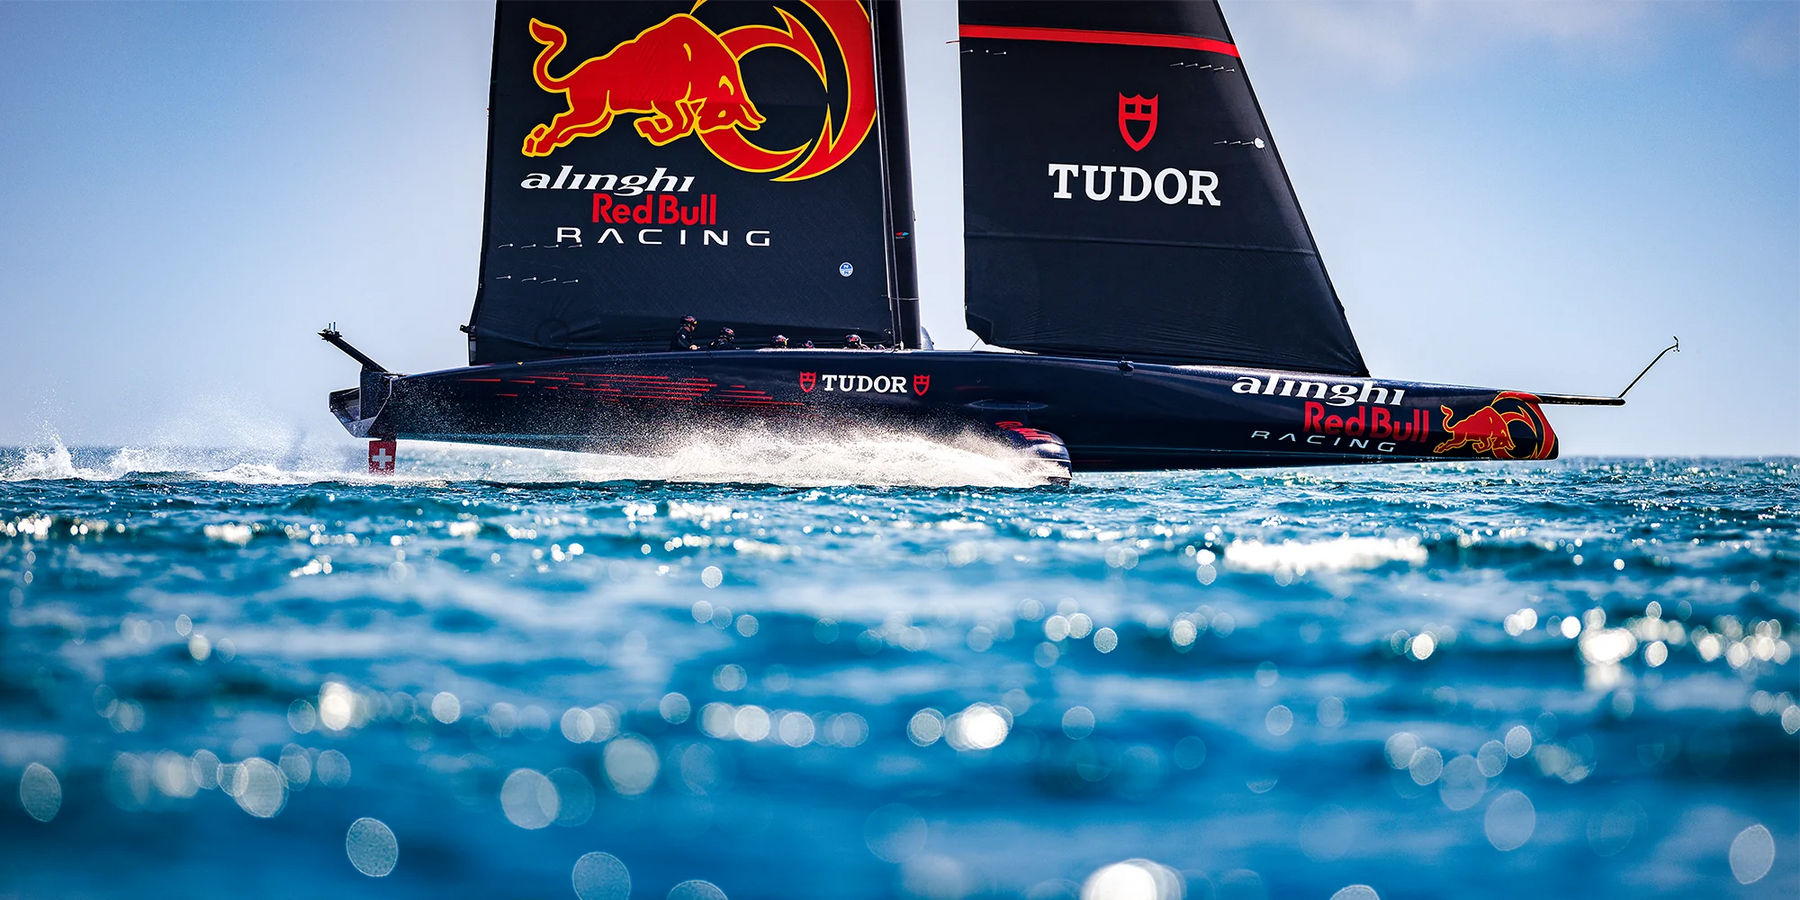 Alinghi Red Bull Team with Sail Racing gear